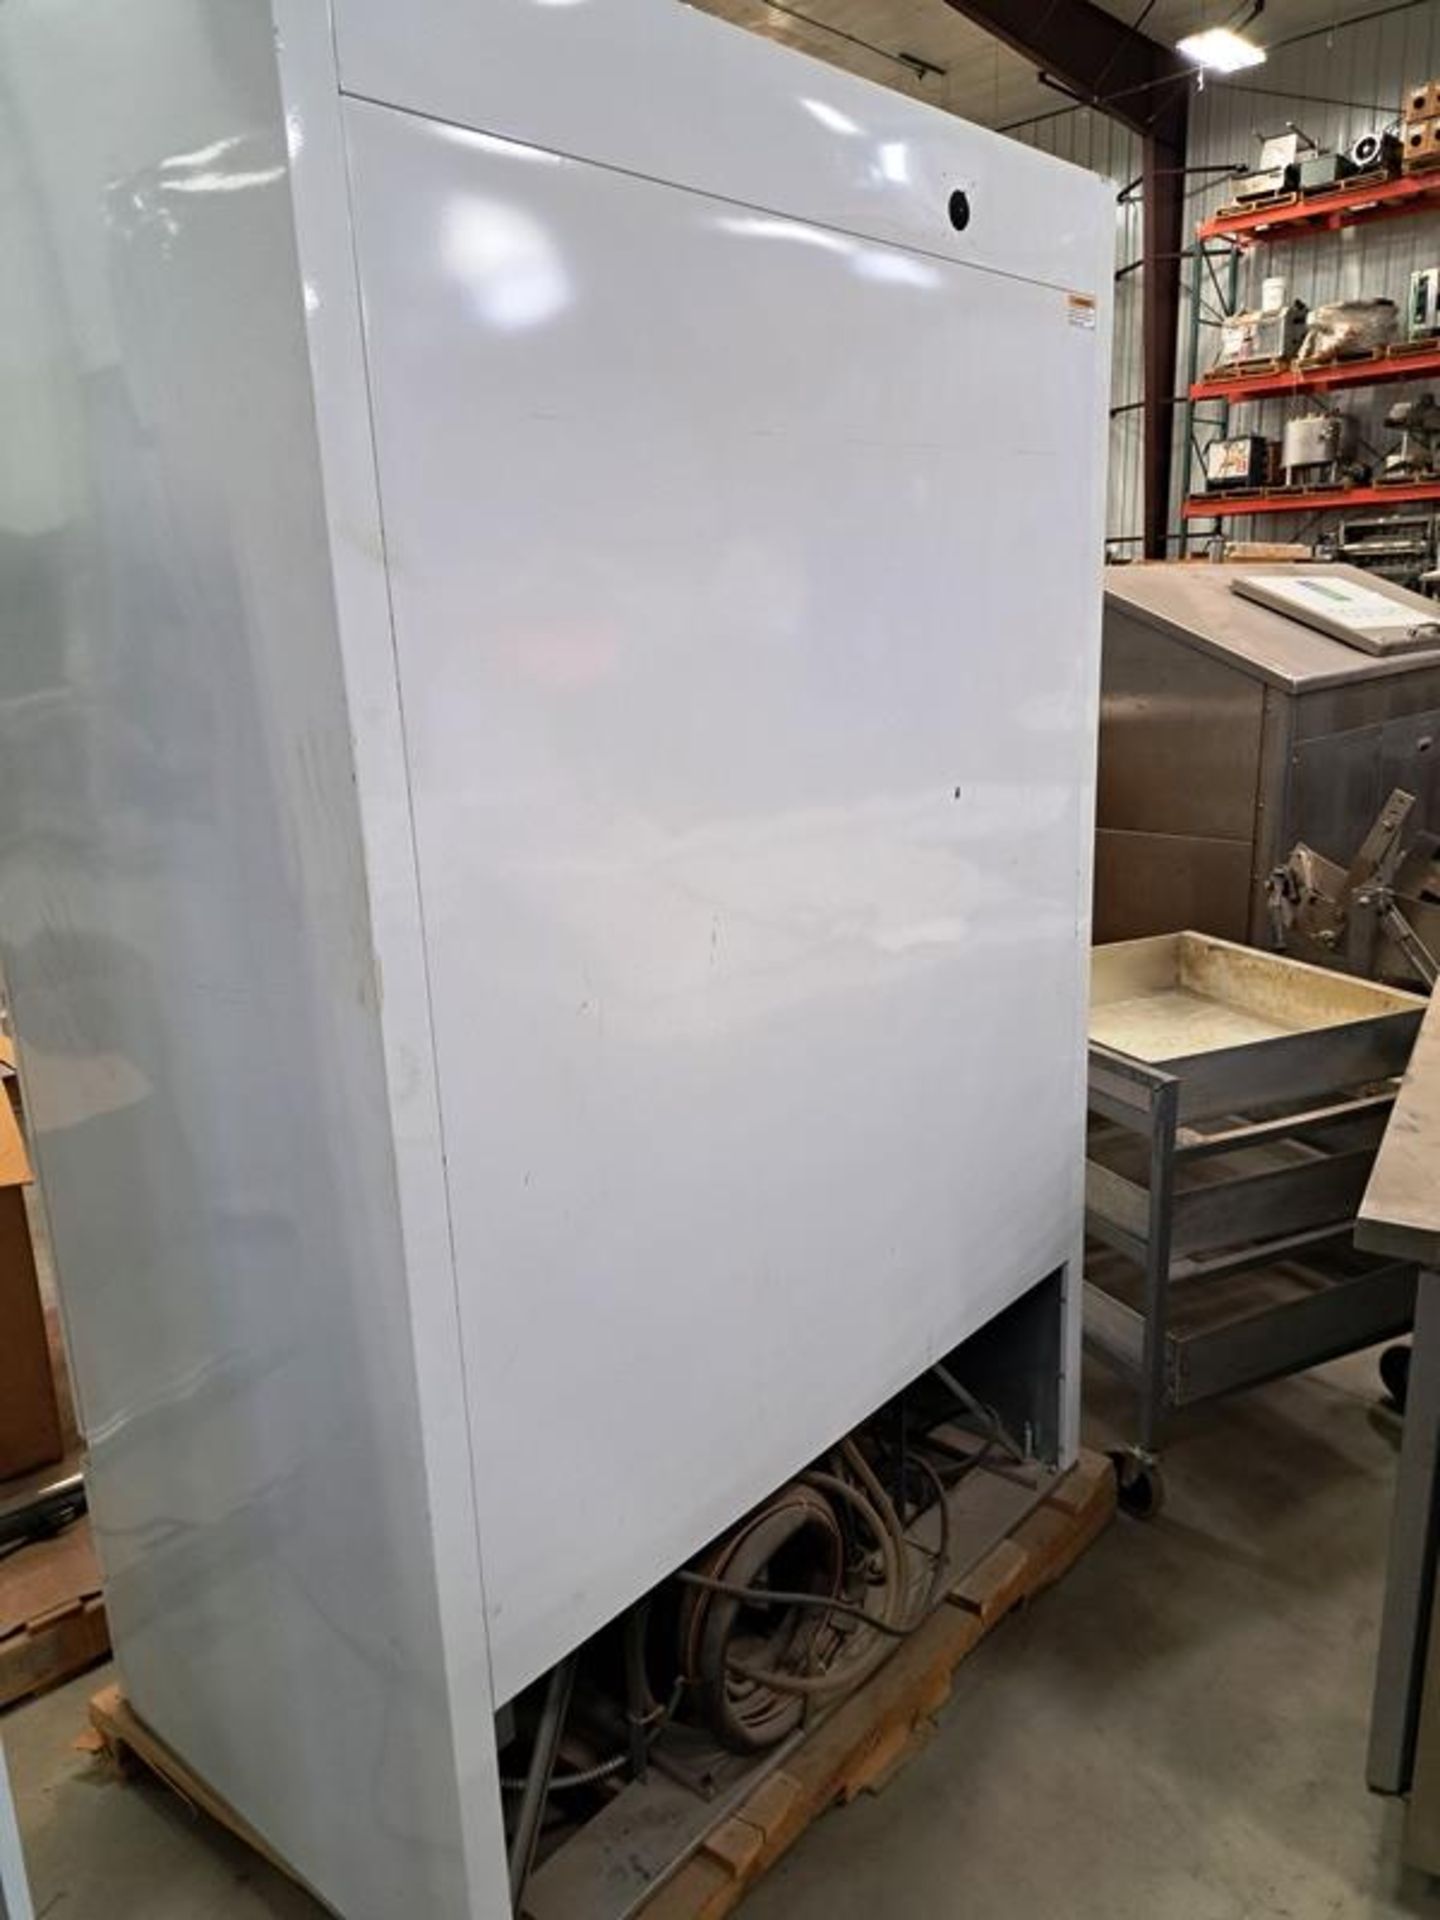 Beverage Air Mdl. CFG-48-5 Glass Front Double Door Freezer, 115 volts (Required Loading Fee: $25.00) - Image 2 of 6